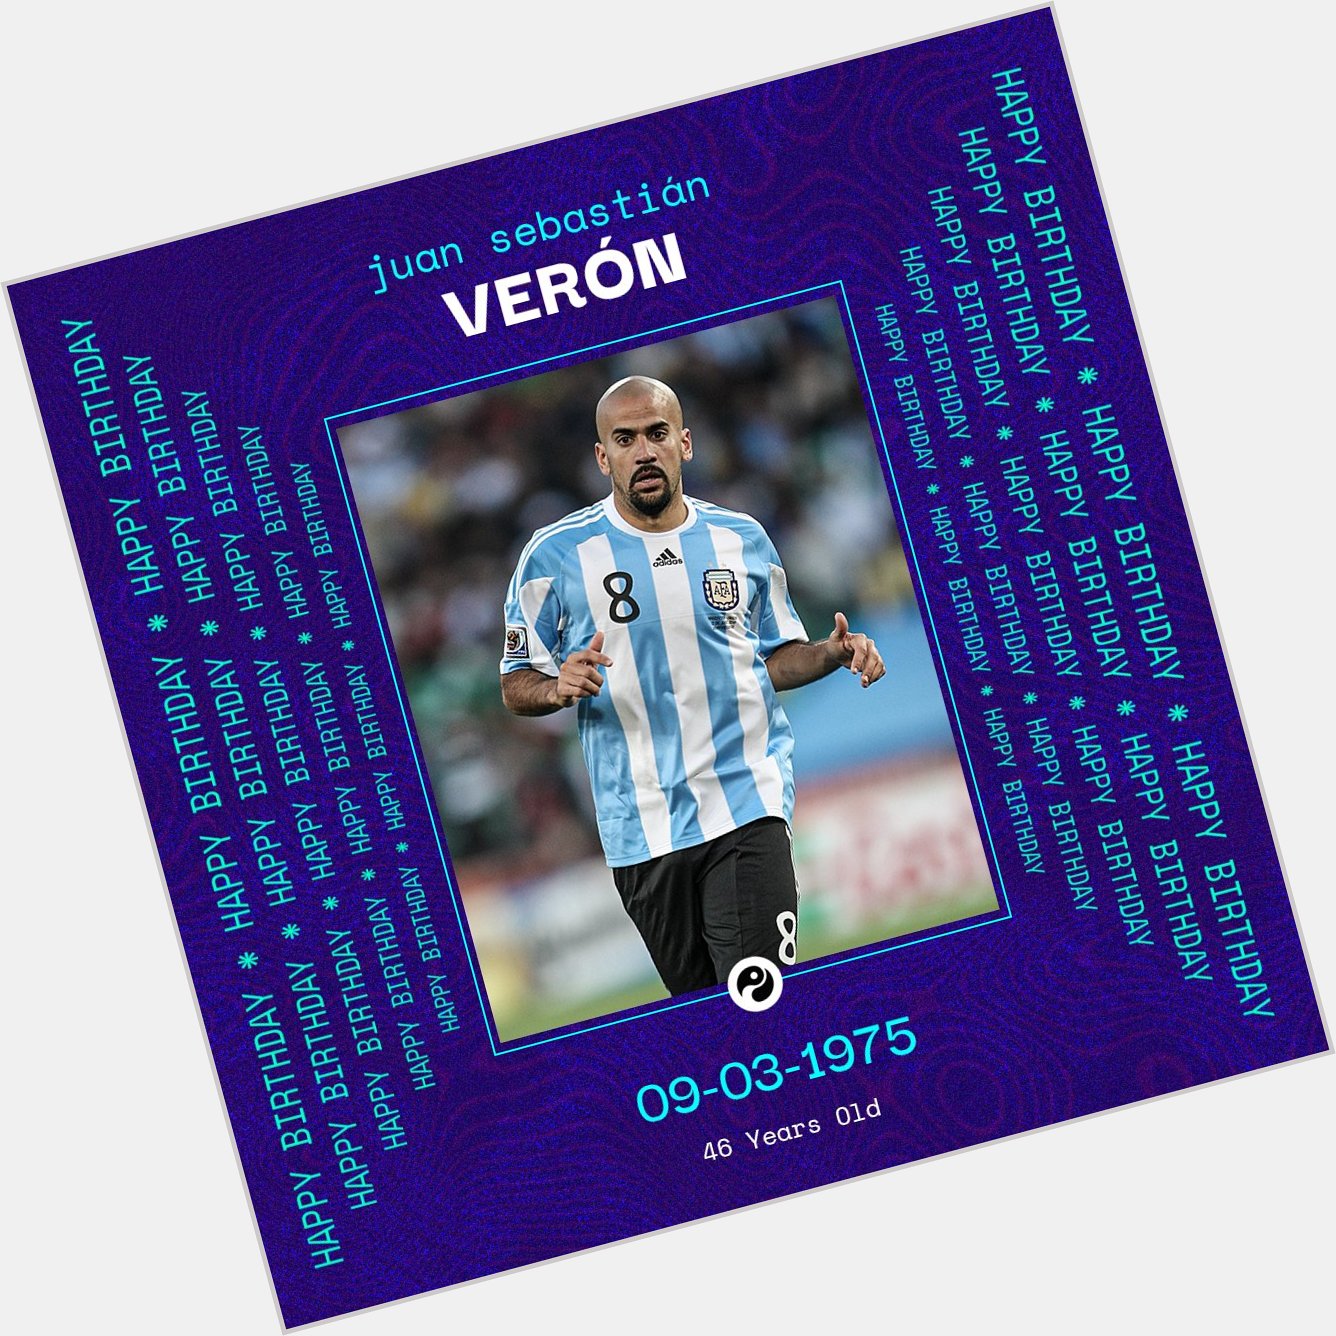 A two-time Serie A winner and Premier League winner with Manchester United.

Happy birthday, Juan Sebastián Verón. 